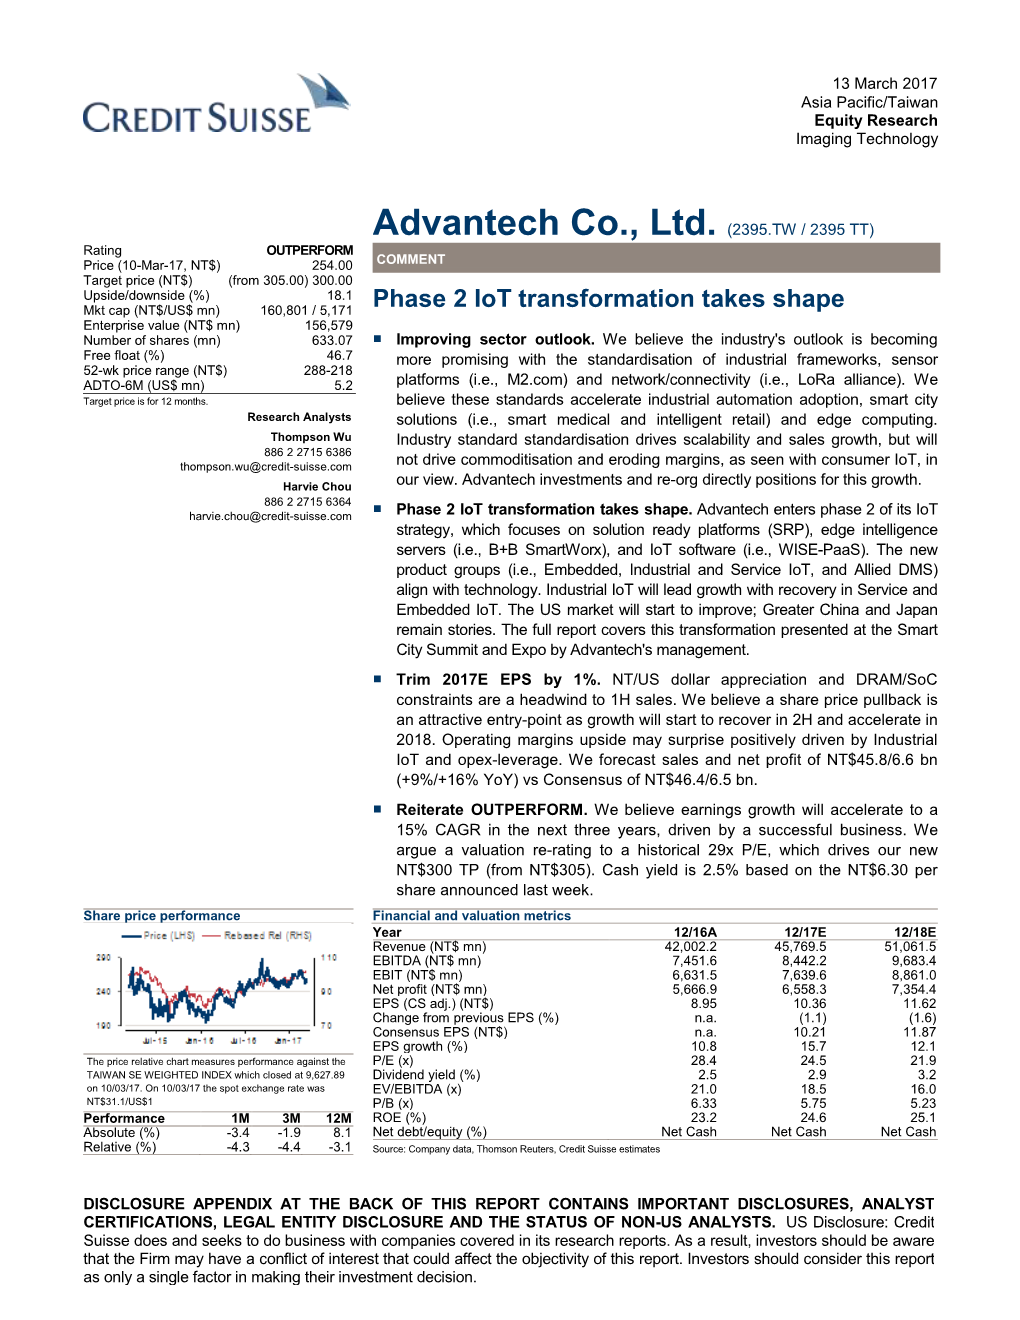 Advantech Co., Ltd. (2395.TW / 2395 TT) Rating OUTPERFORM Price (10-Mar-17, NT$) 254.00 COMMENT Target Price (NT$) (From 305.00) 300.00 Upside/Downside (%) 18.1